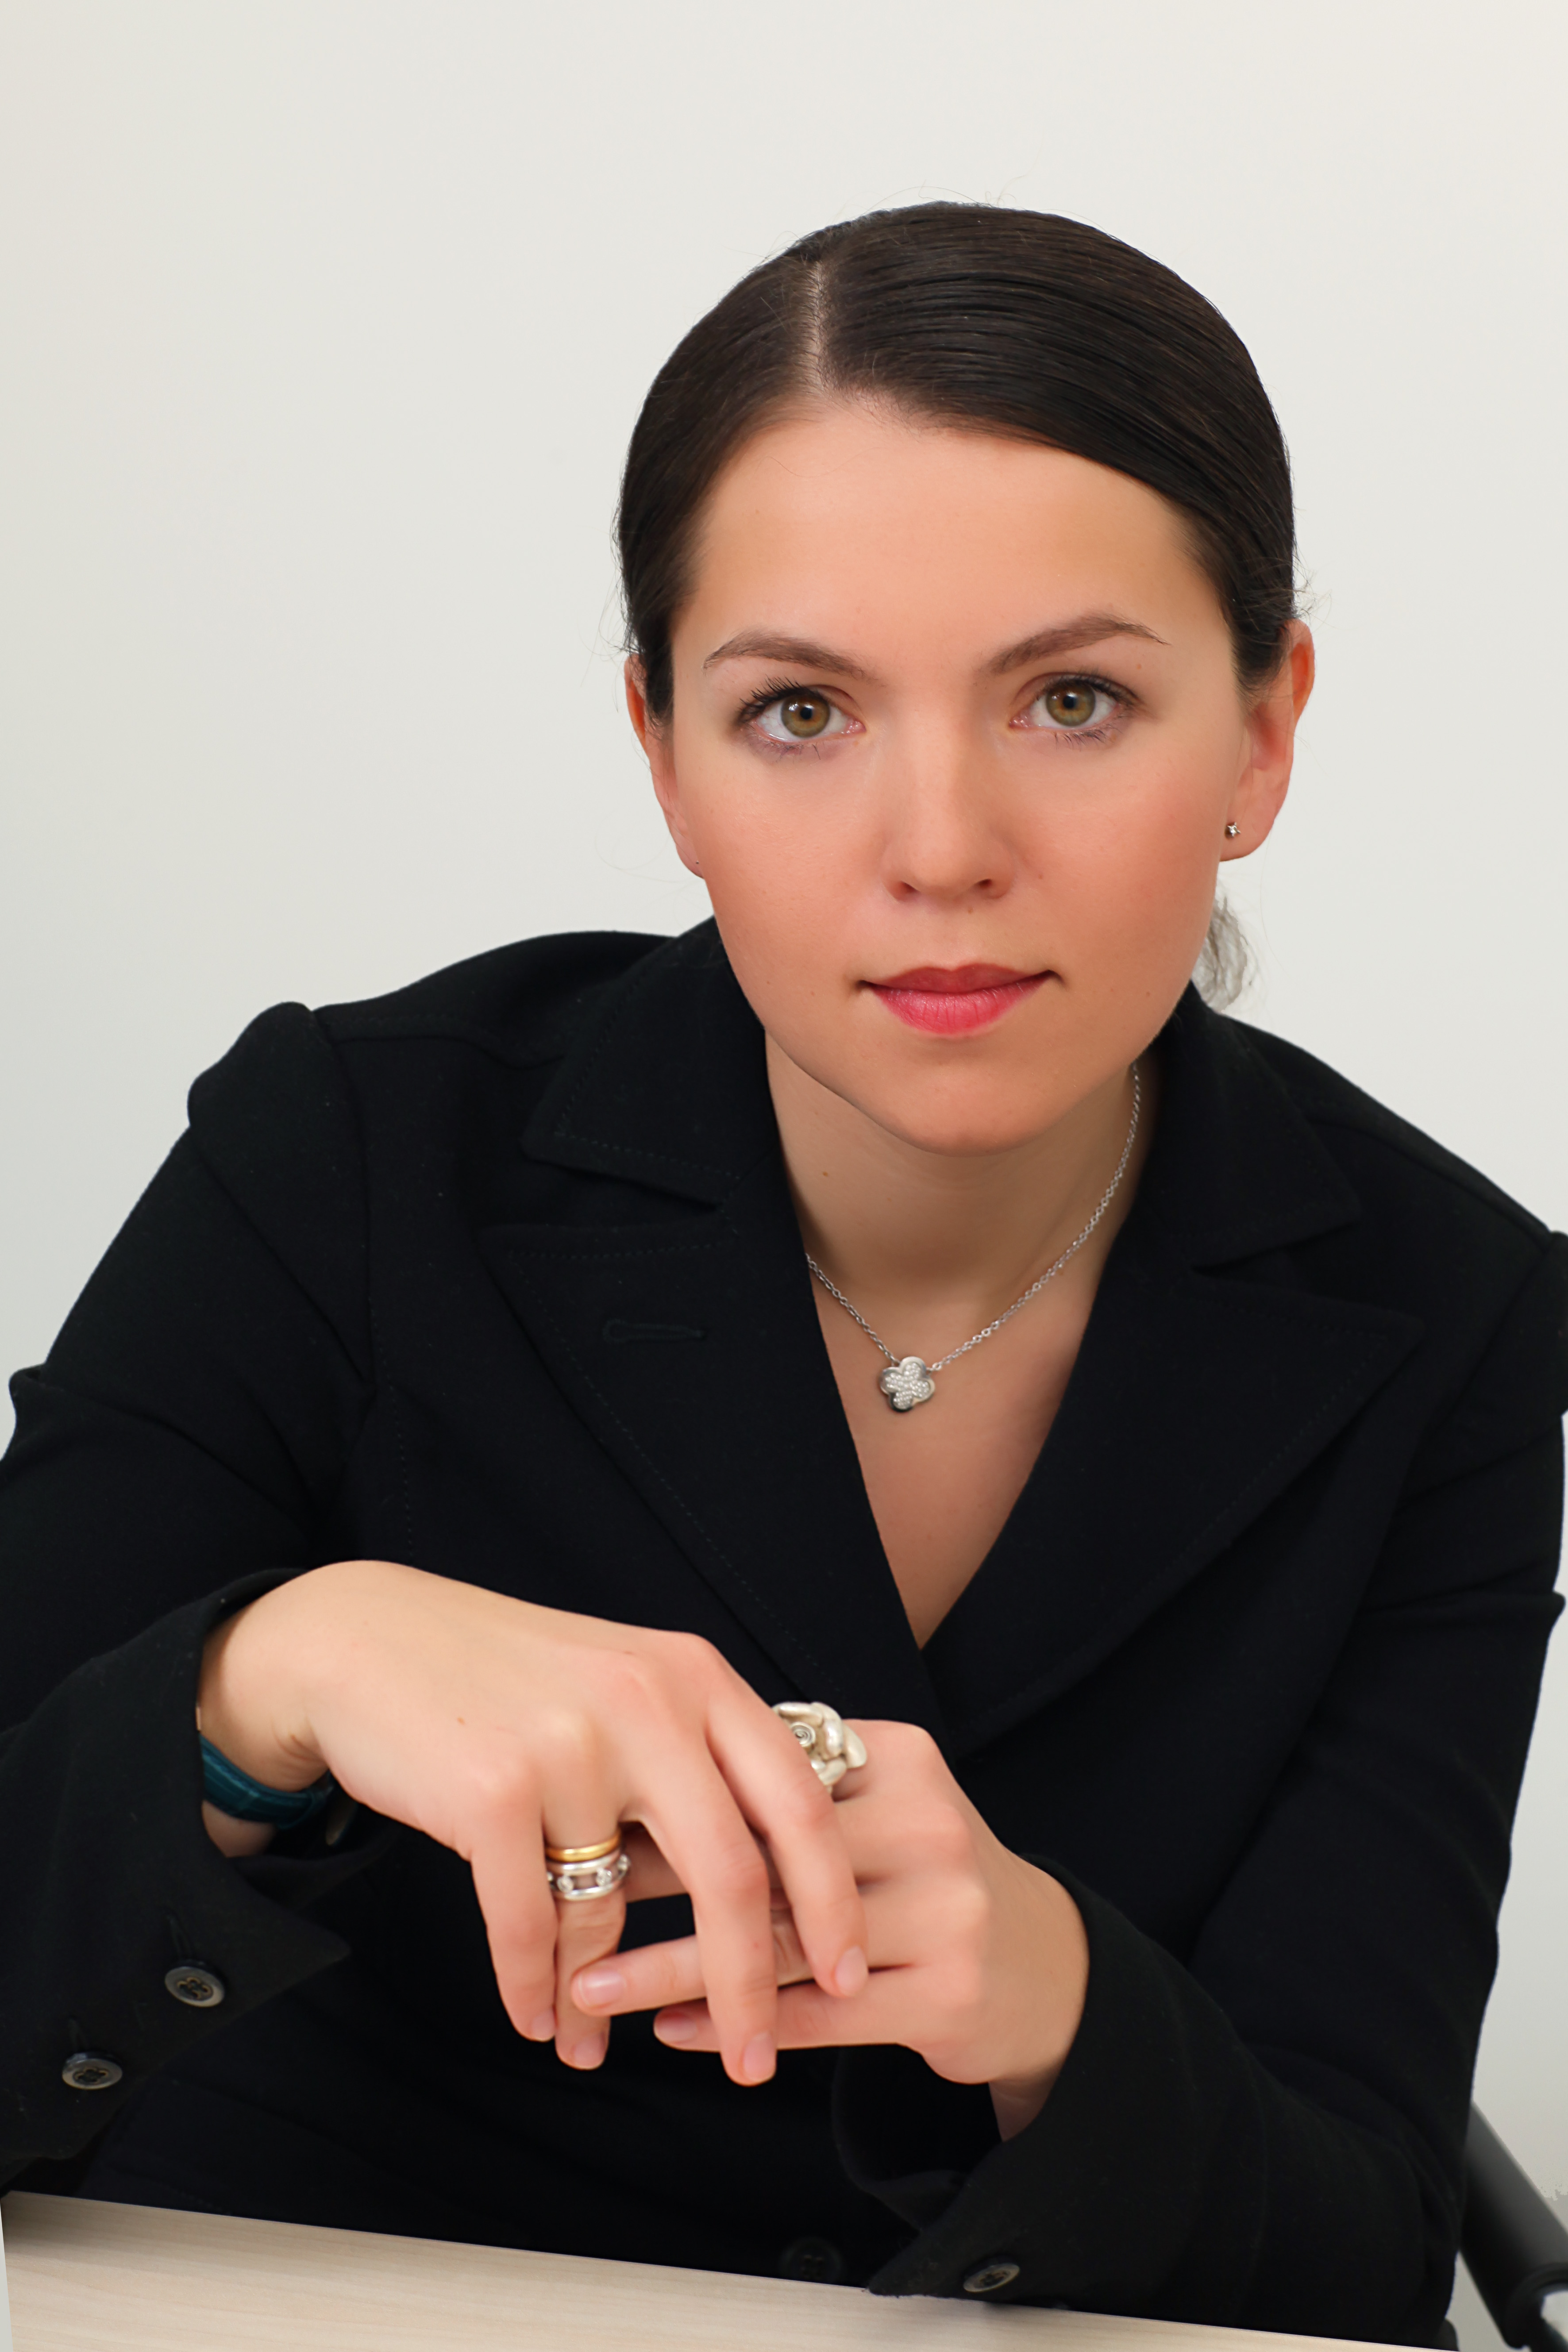 Maria Kolosova has been named General Manager of MEC Russia ...